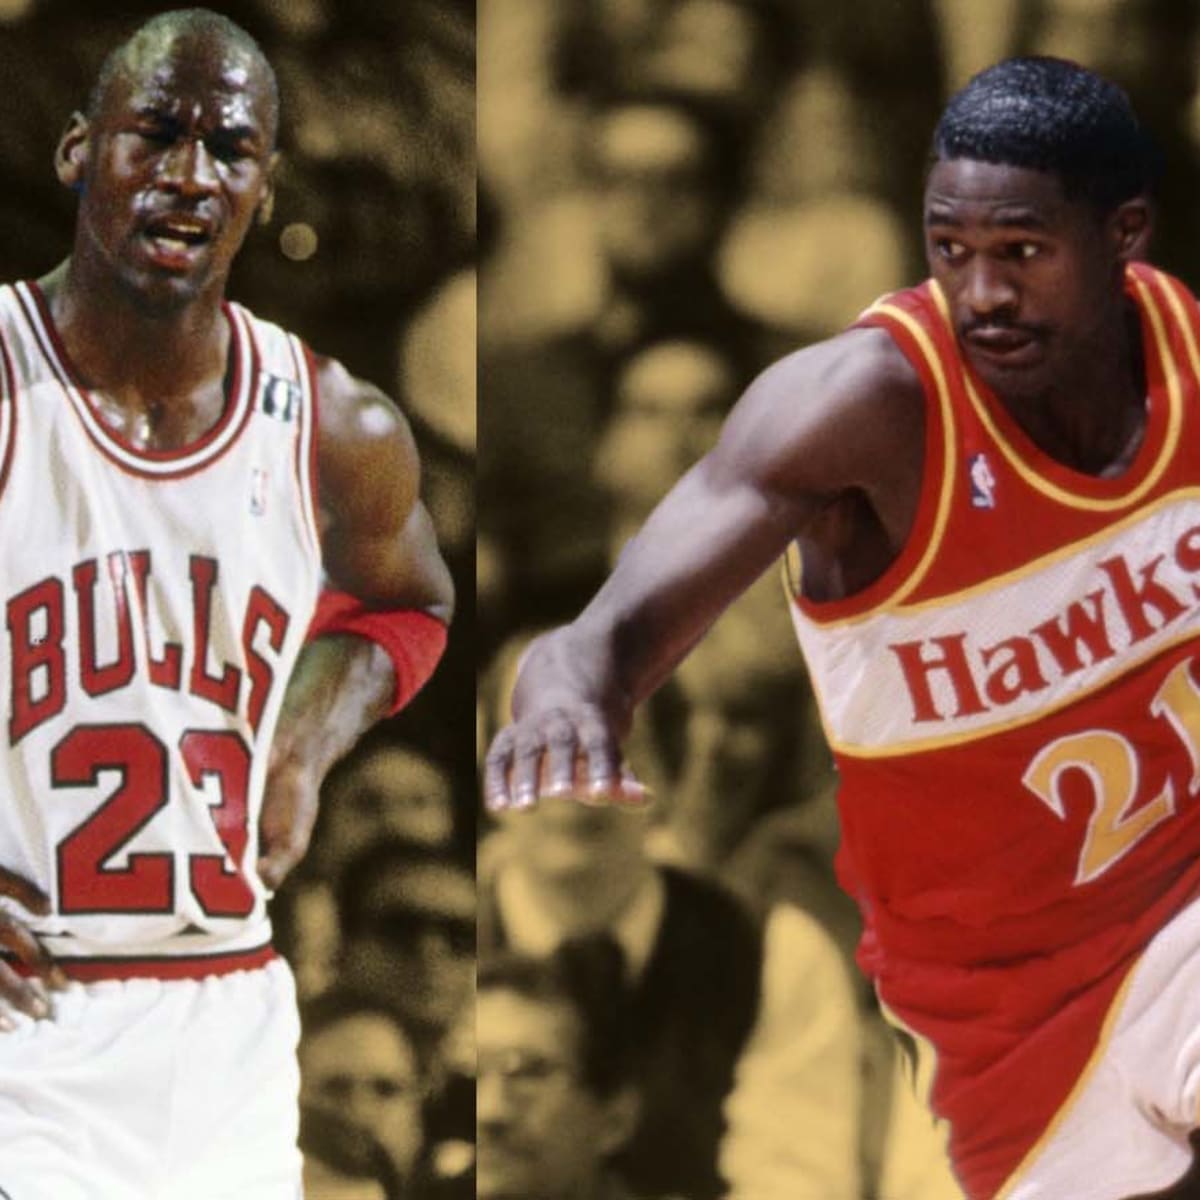 I was a little hot that game” - Dominique Wilkins recalls dropping 57  points on Michael Jordan in 1986, Basketball Network